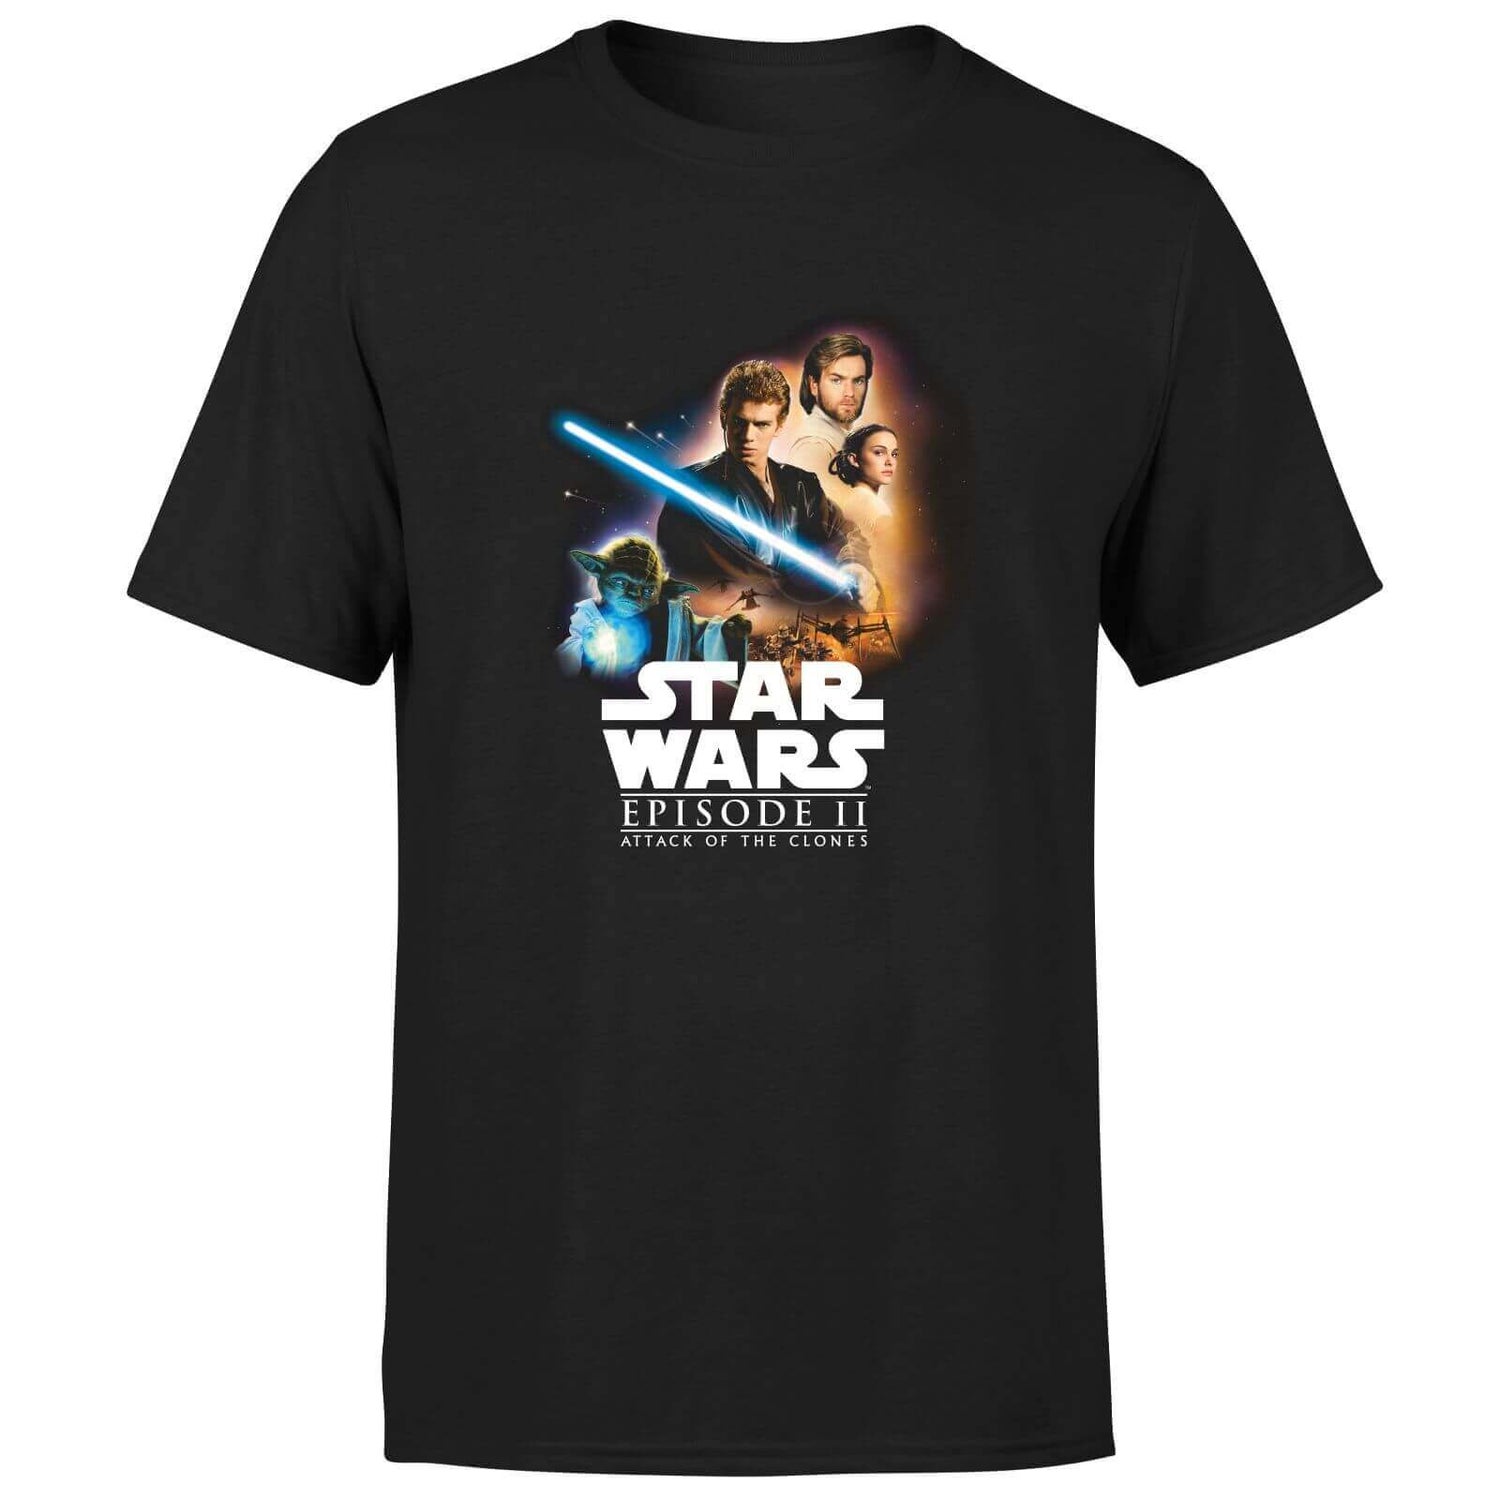 Star Wars Attack Of The Clones Unisex T-Shirt - Black